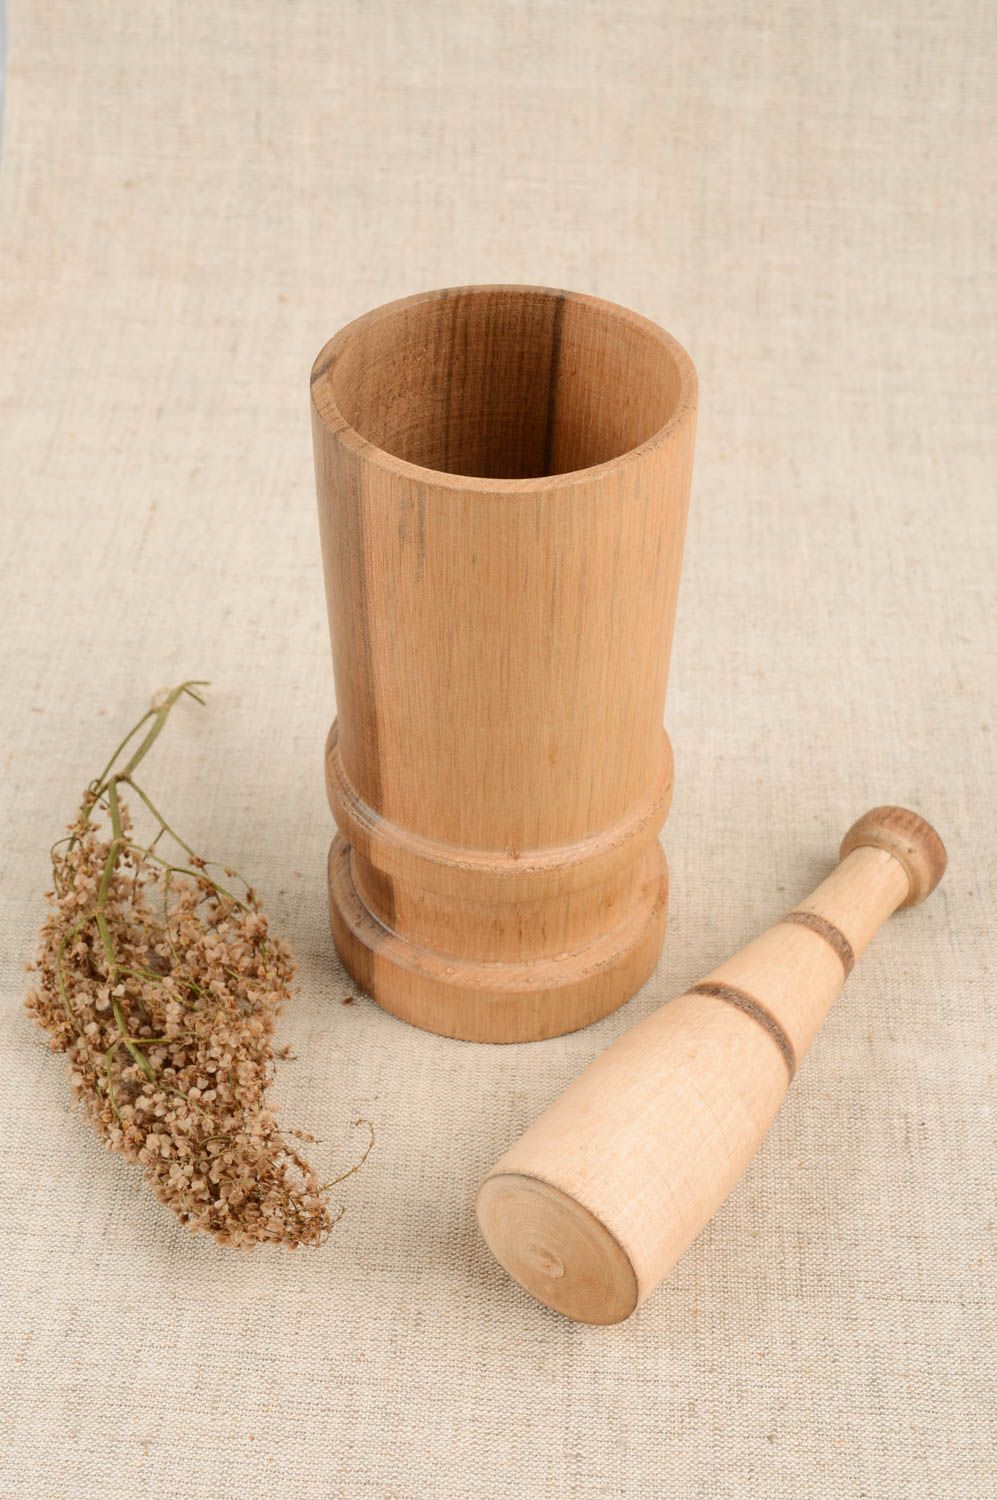 Handmade wooden mortar homemade mortar and pestle wooden kitchenware eco gifts photo 1